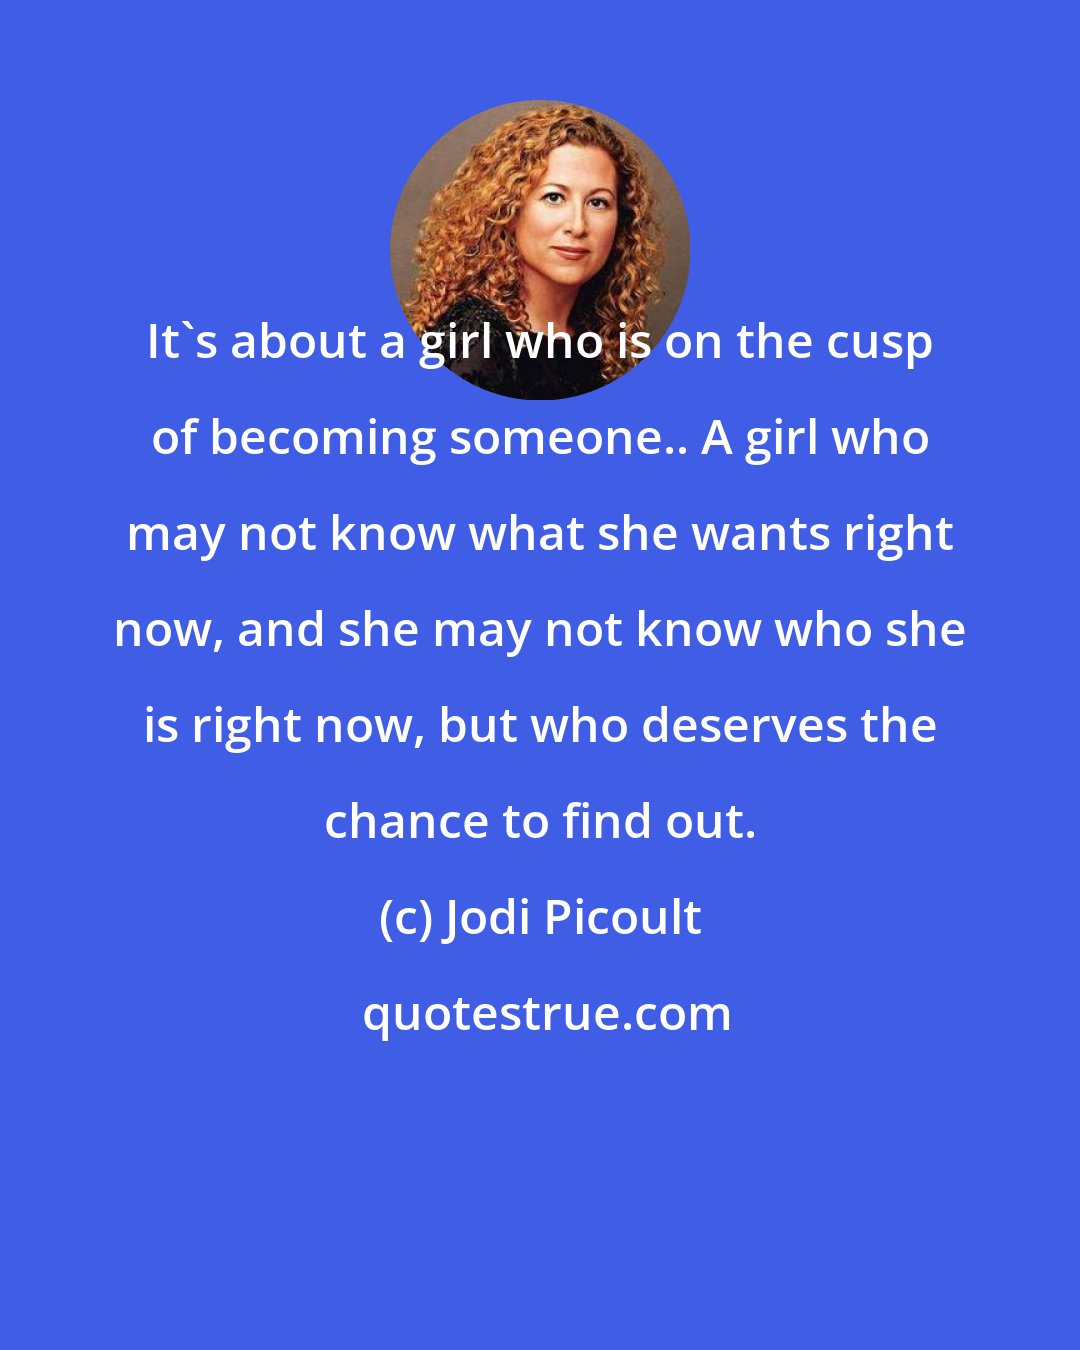 Jodi Picoult: It's about a girl who is on the cusp of becoming someone.. A girl who may not know what she wants right now, and she may not know who she is right now, but who deserves the chance to find out.